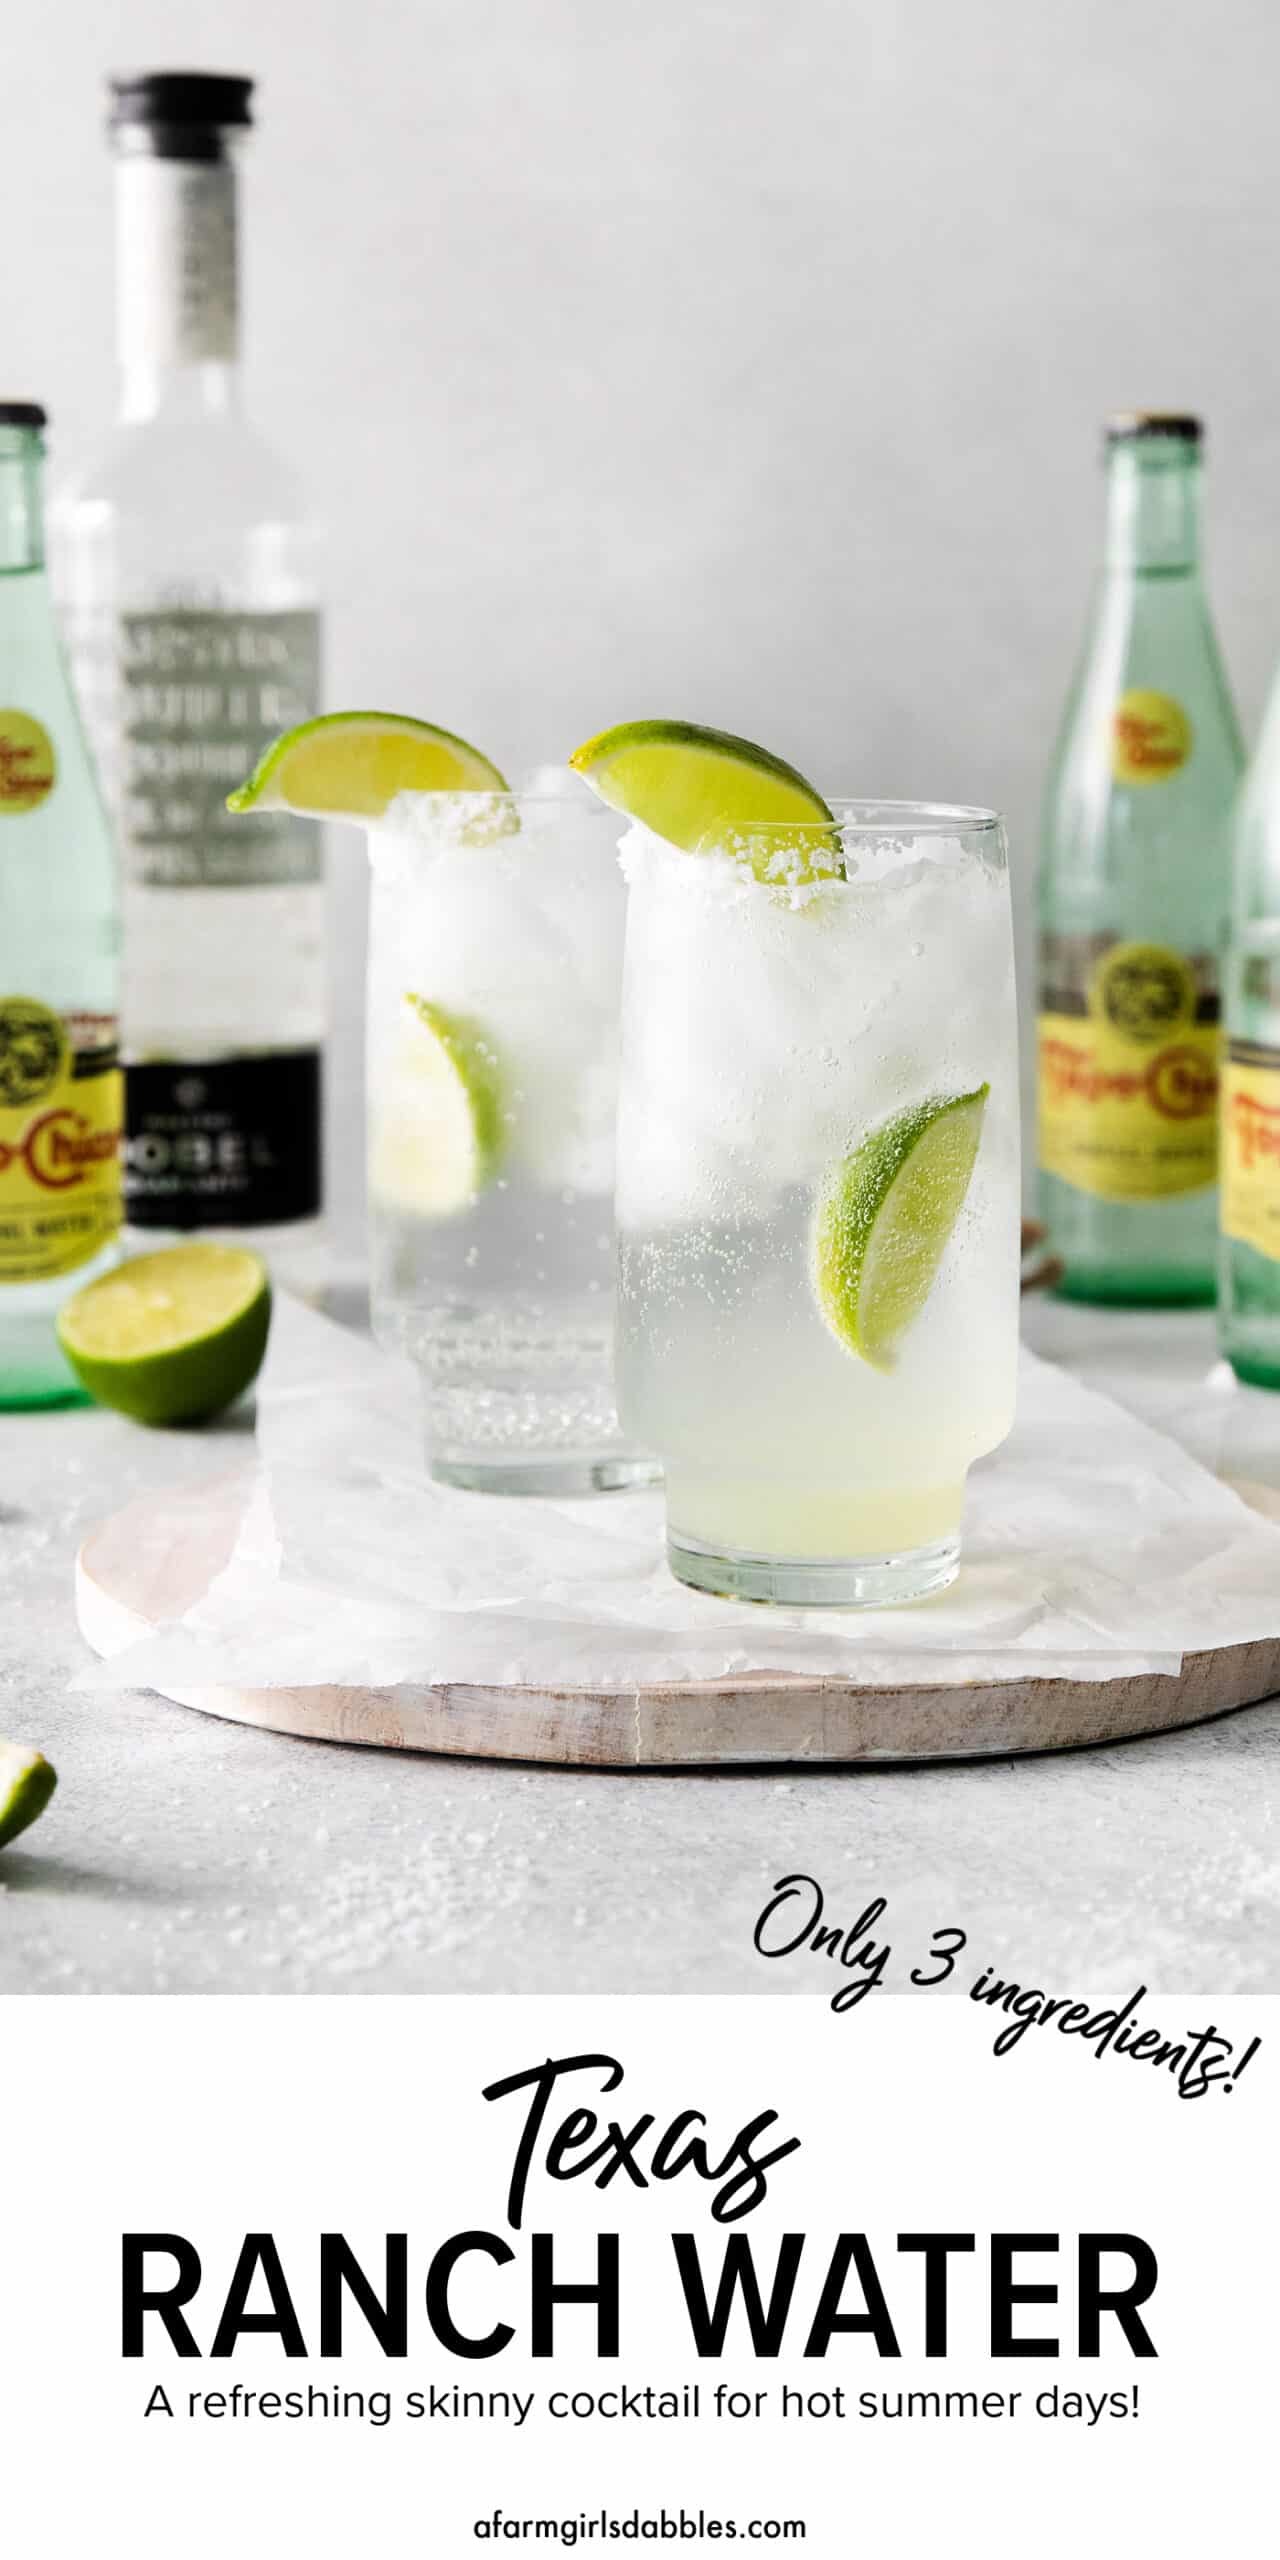 Pinterest image for Texas ranch water cocktail